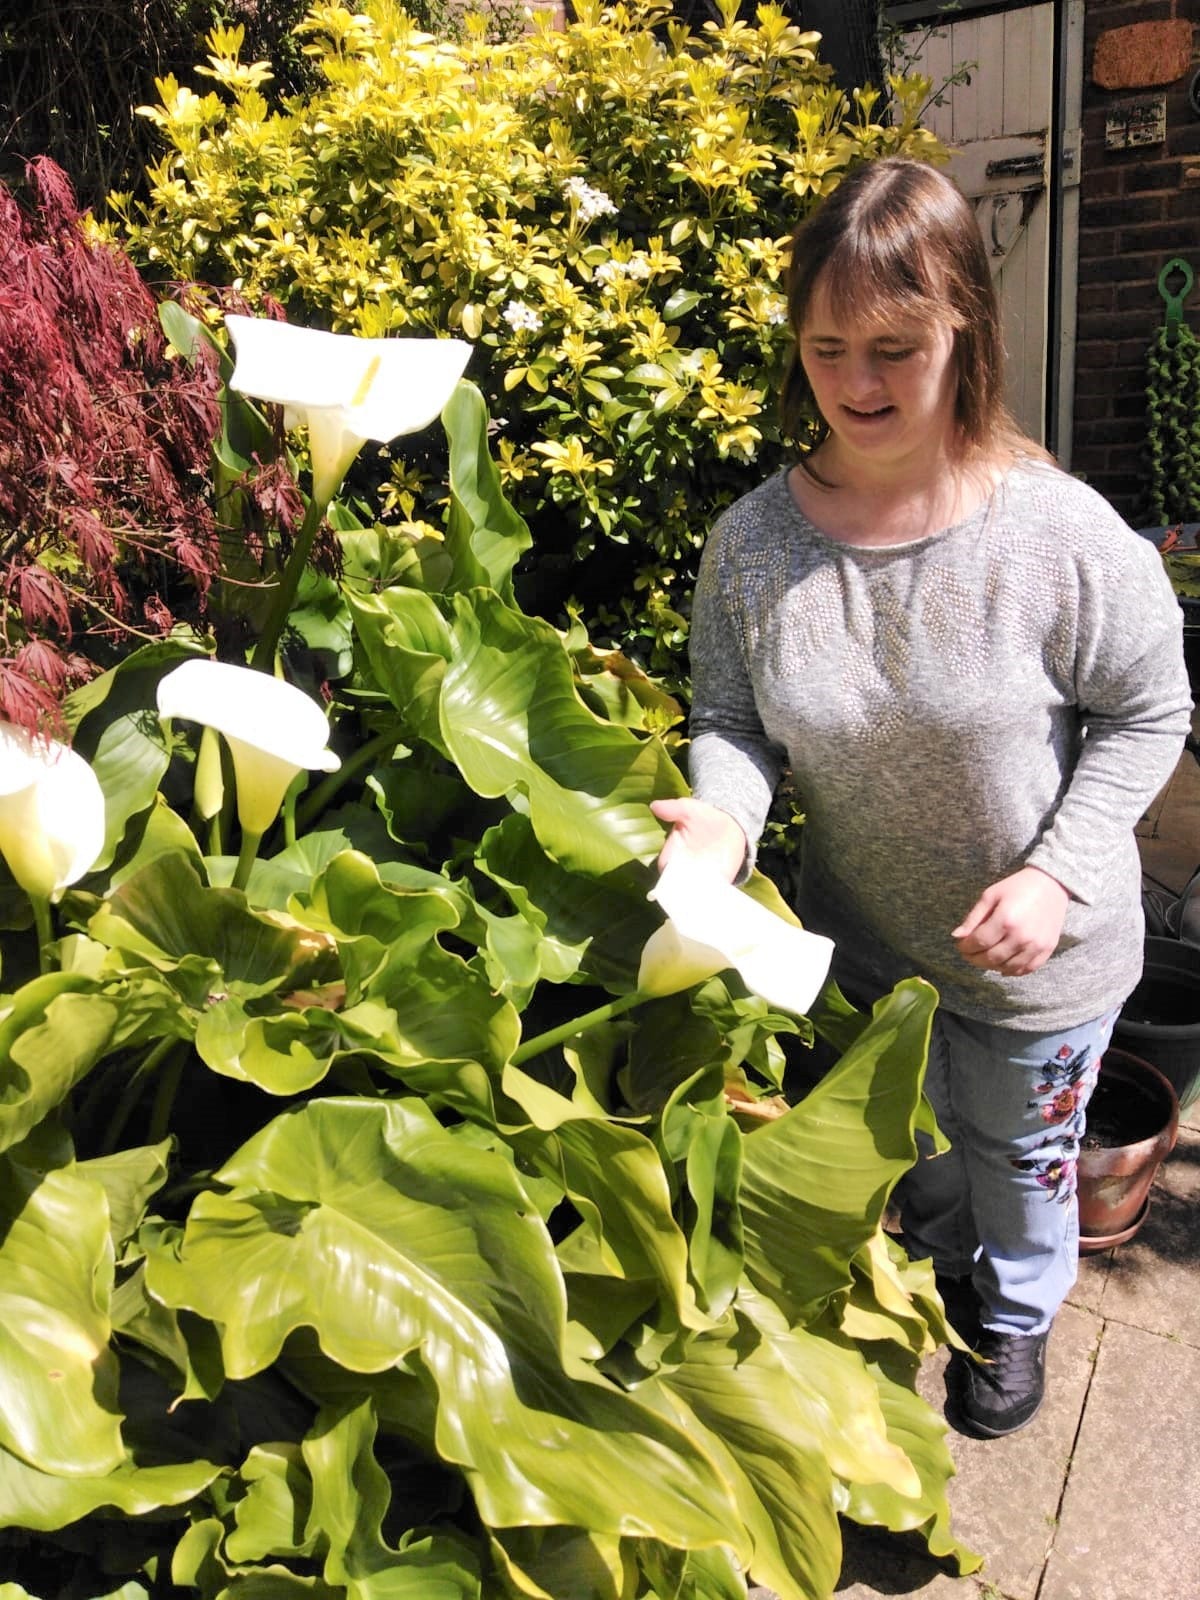 A woman stands by a large clump of arum lilies. There are lots of green glossy leaves and white trumpet-like flowers. The woman has Down's syndrome